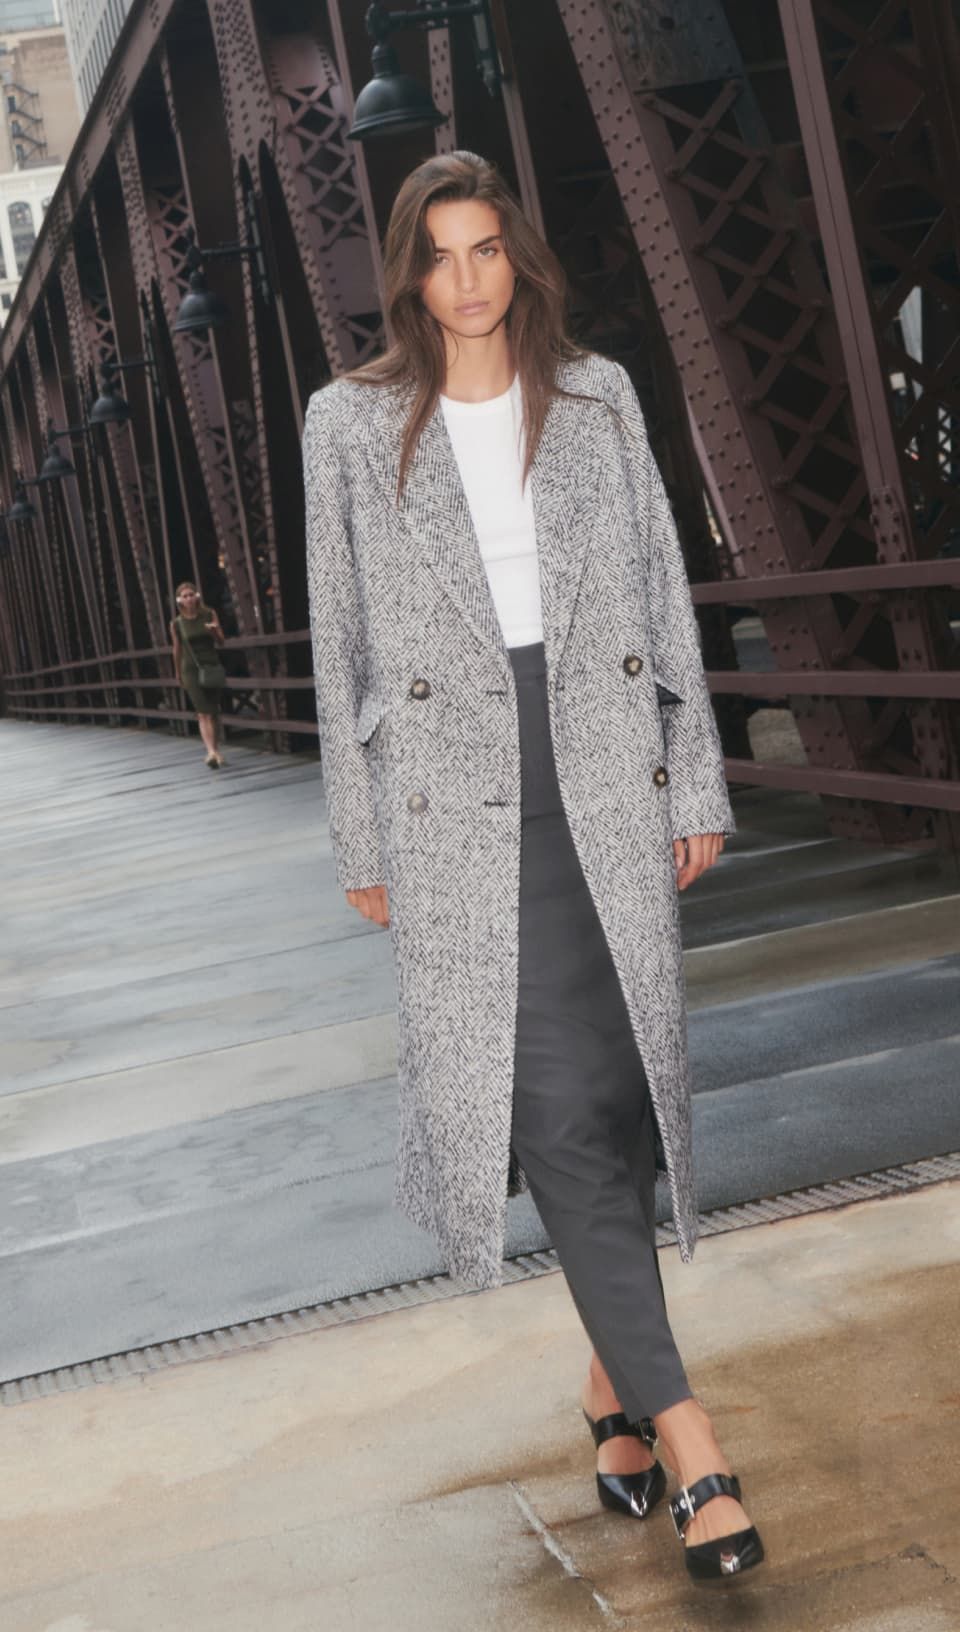 A model wears a grey trench coat with a grey pencil skirt and white top.